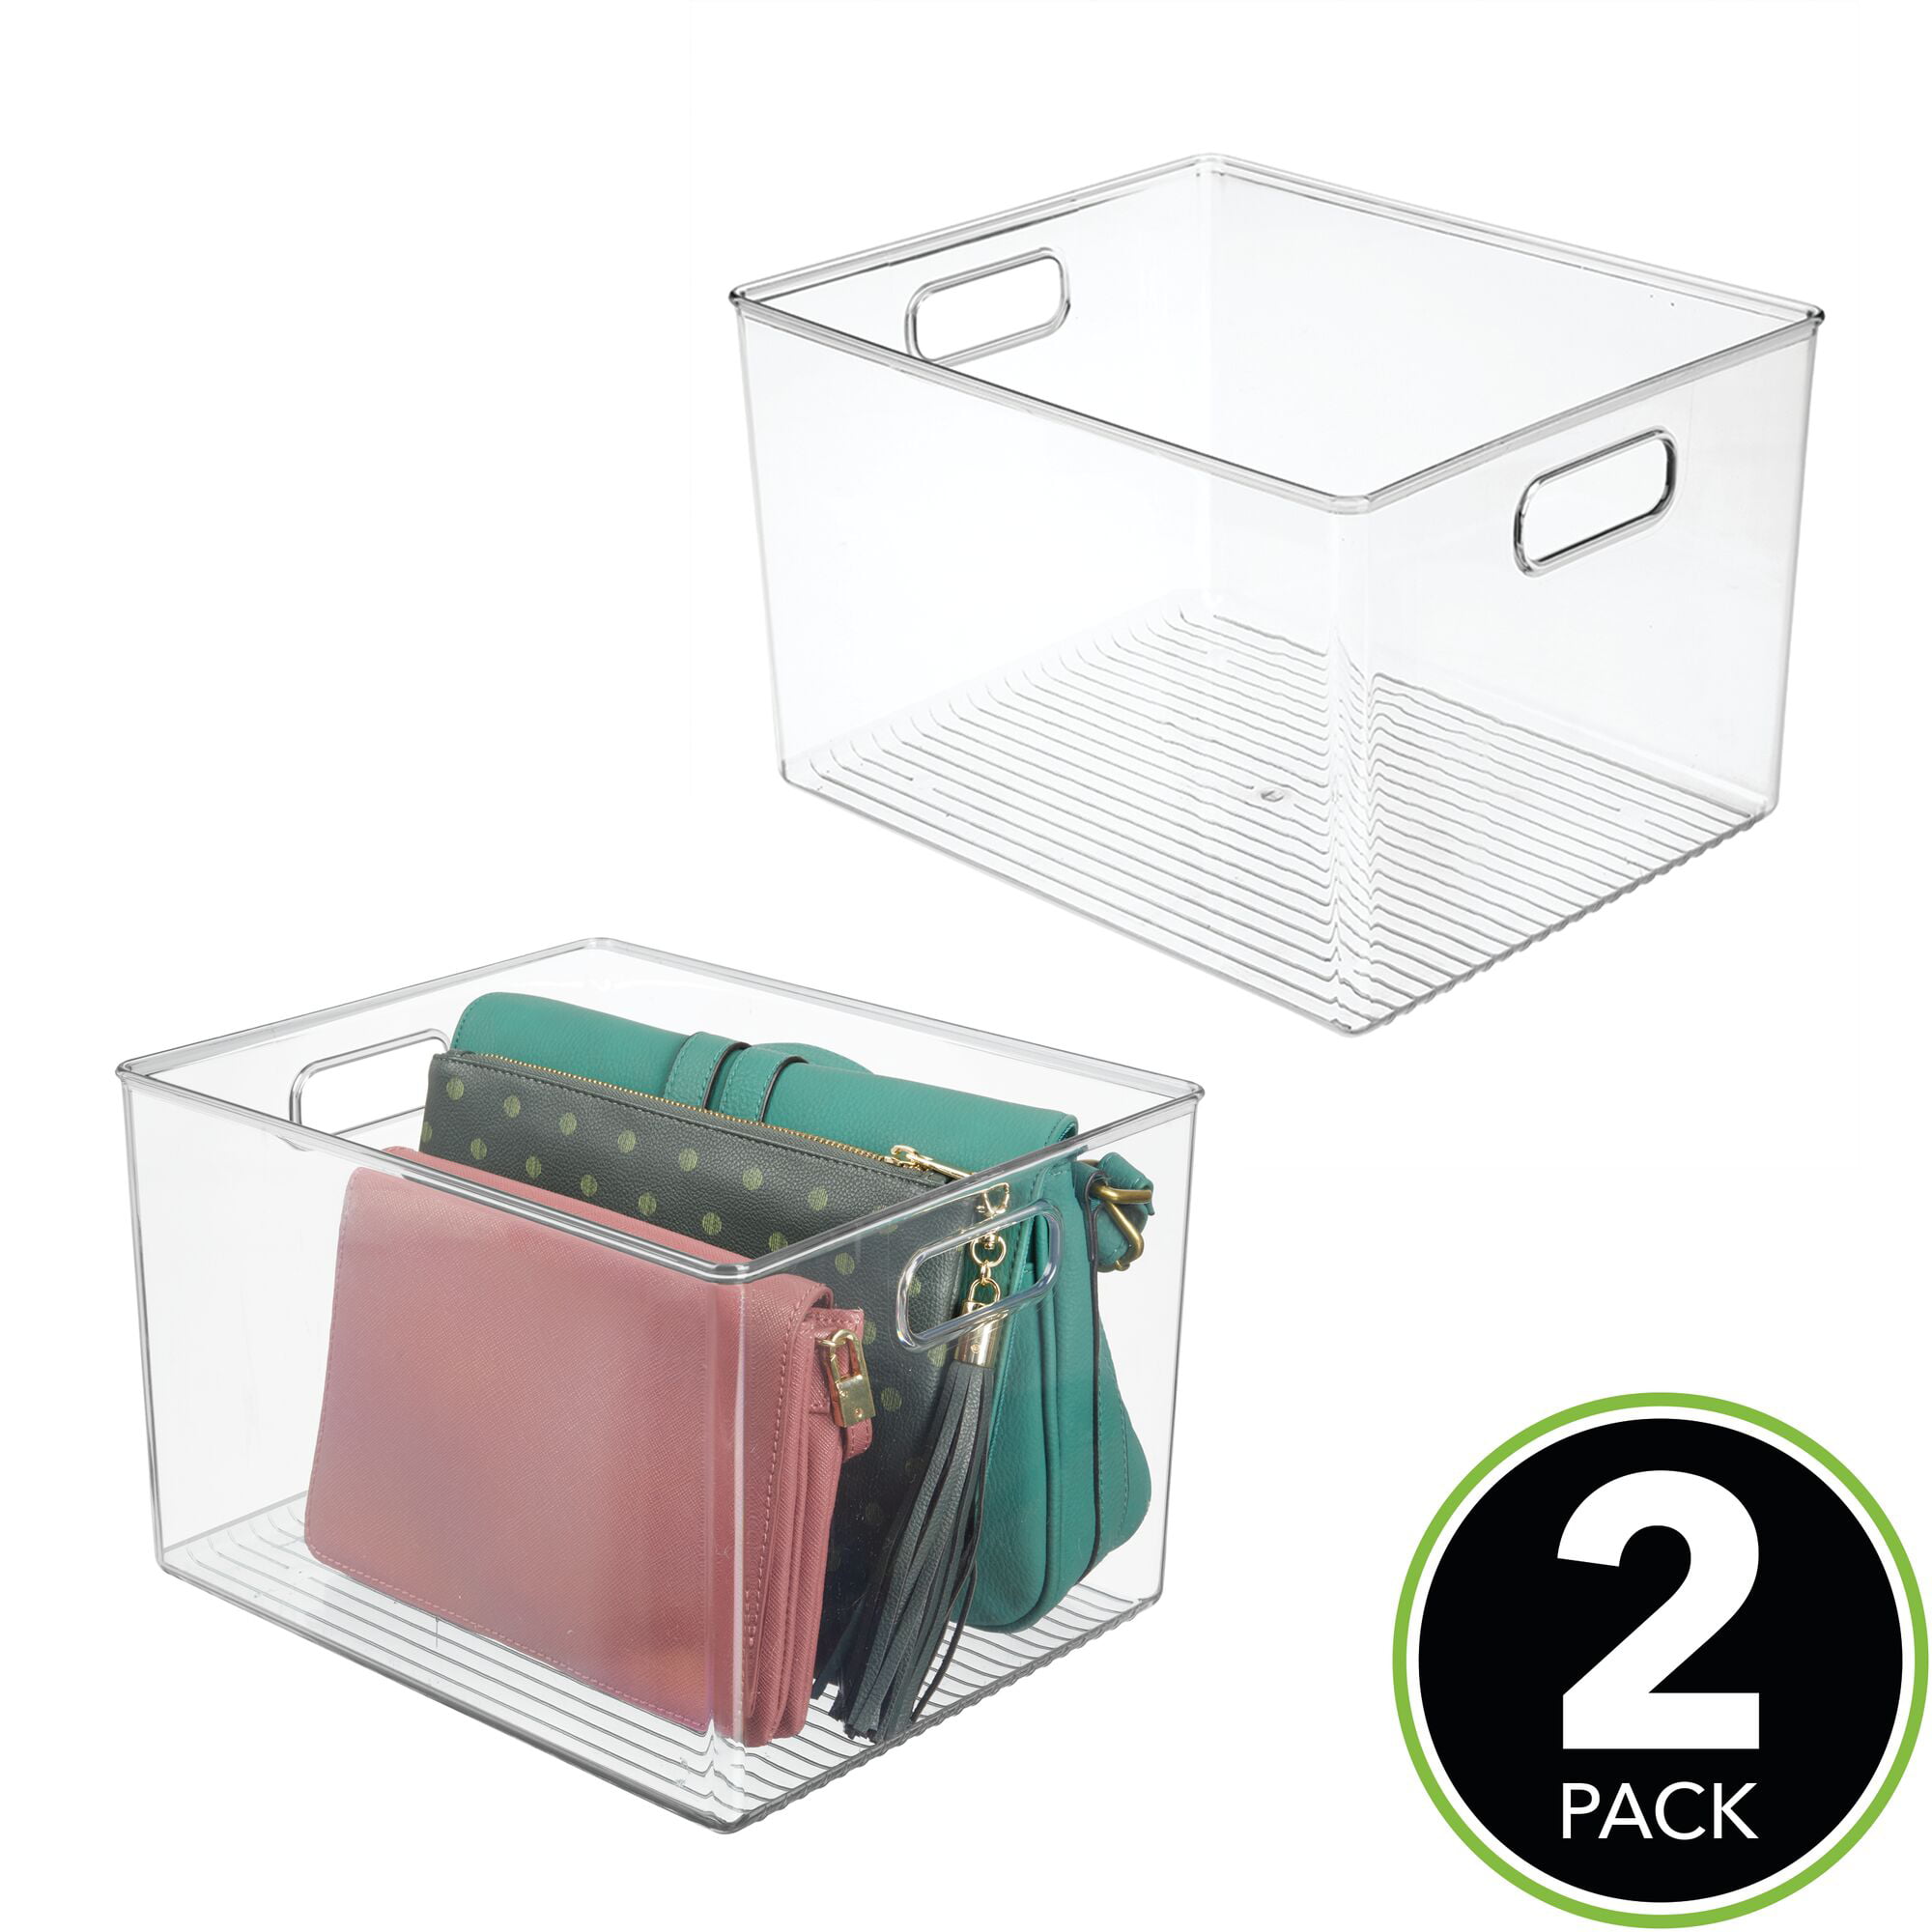 Clear 2 Pack mDesign Plastic Storage Organizer Bin with Handles for Closets 